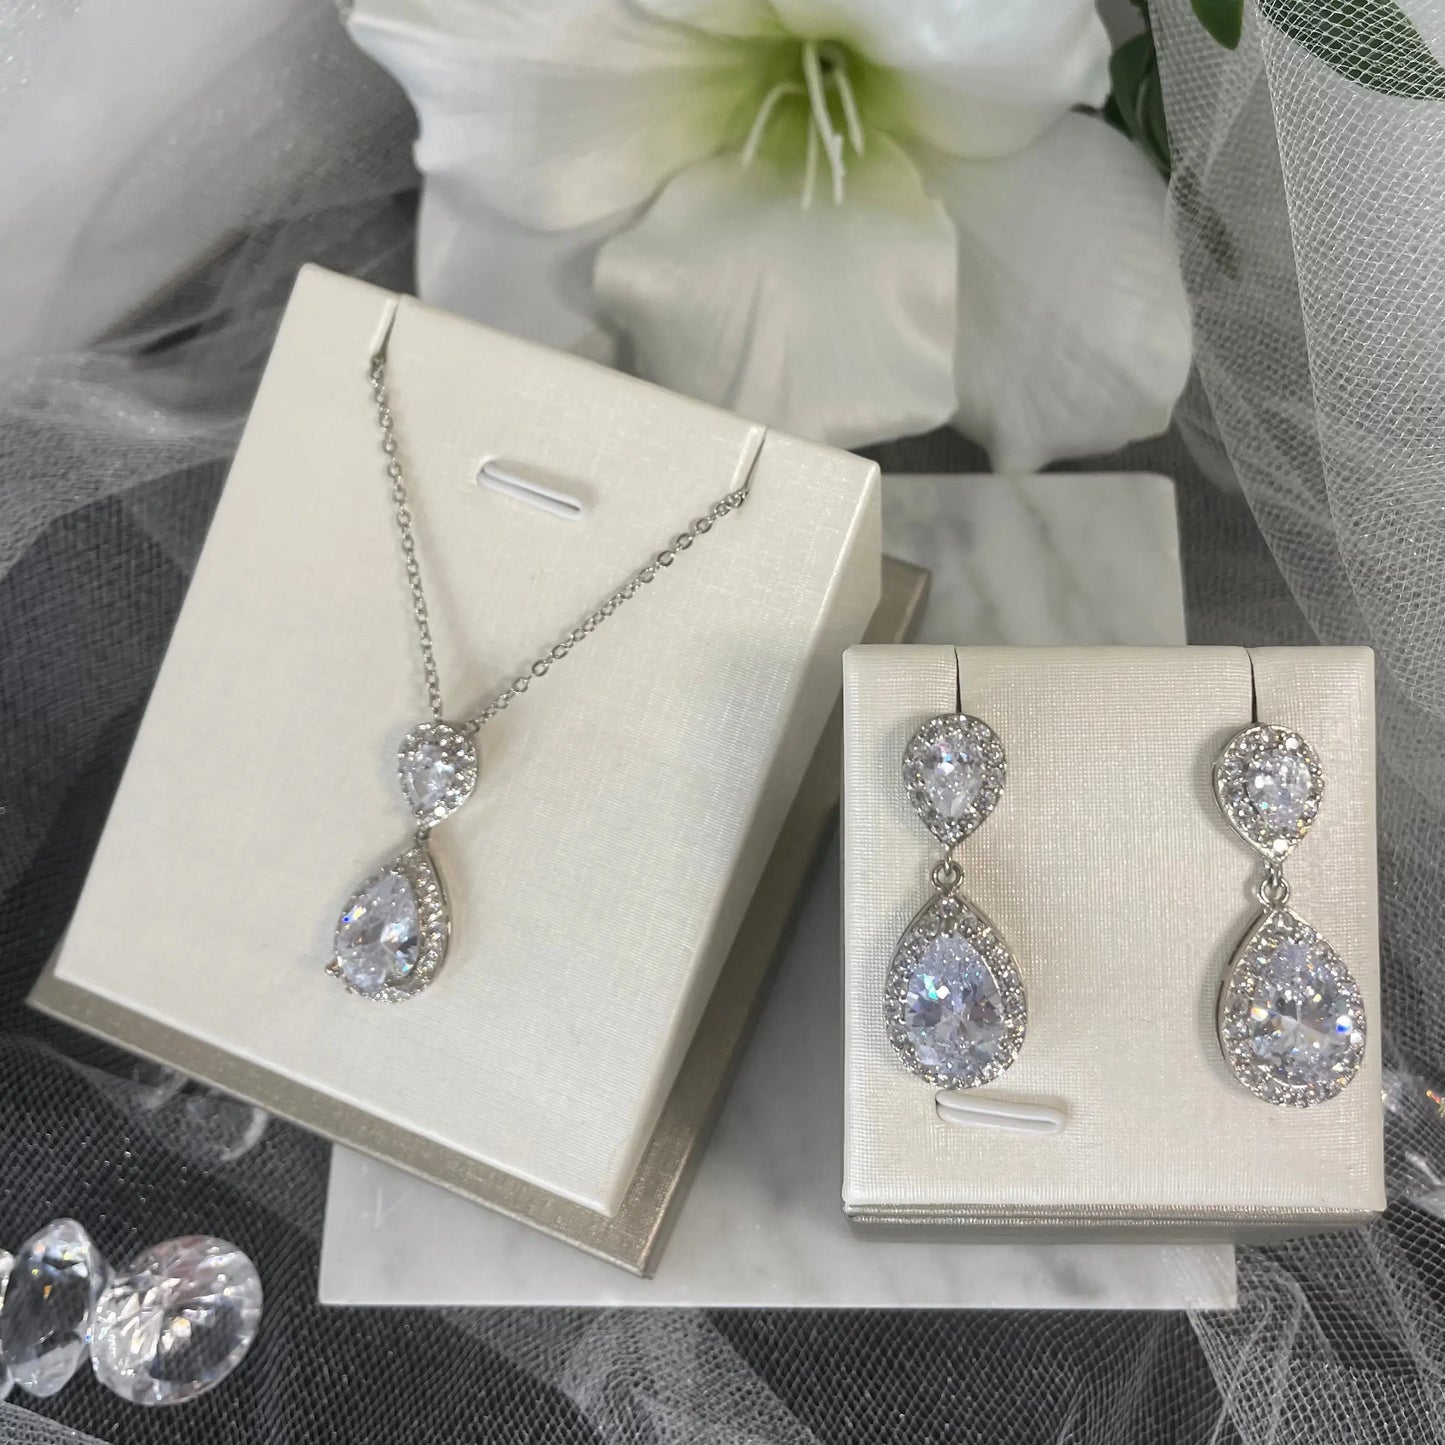 Leona Necklace & Earring Set (Silver): A stunning silver necklace and earring set featuring large CZ stones surrounded by smaller CZs, perfect for special occasions.